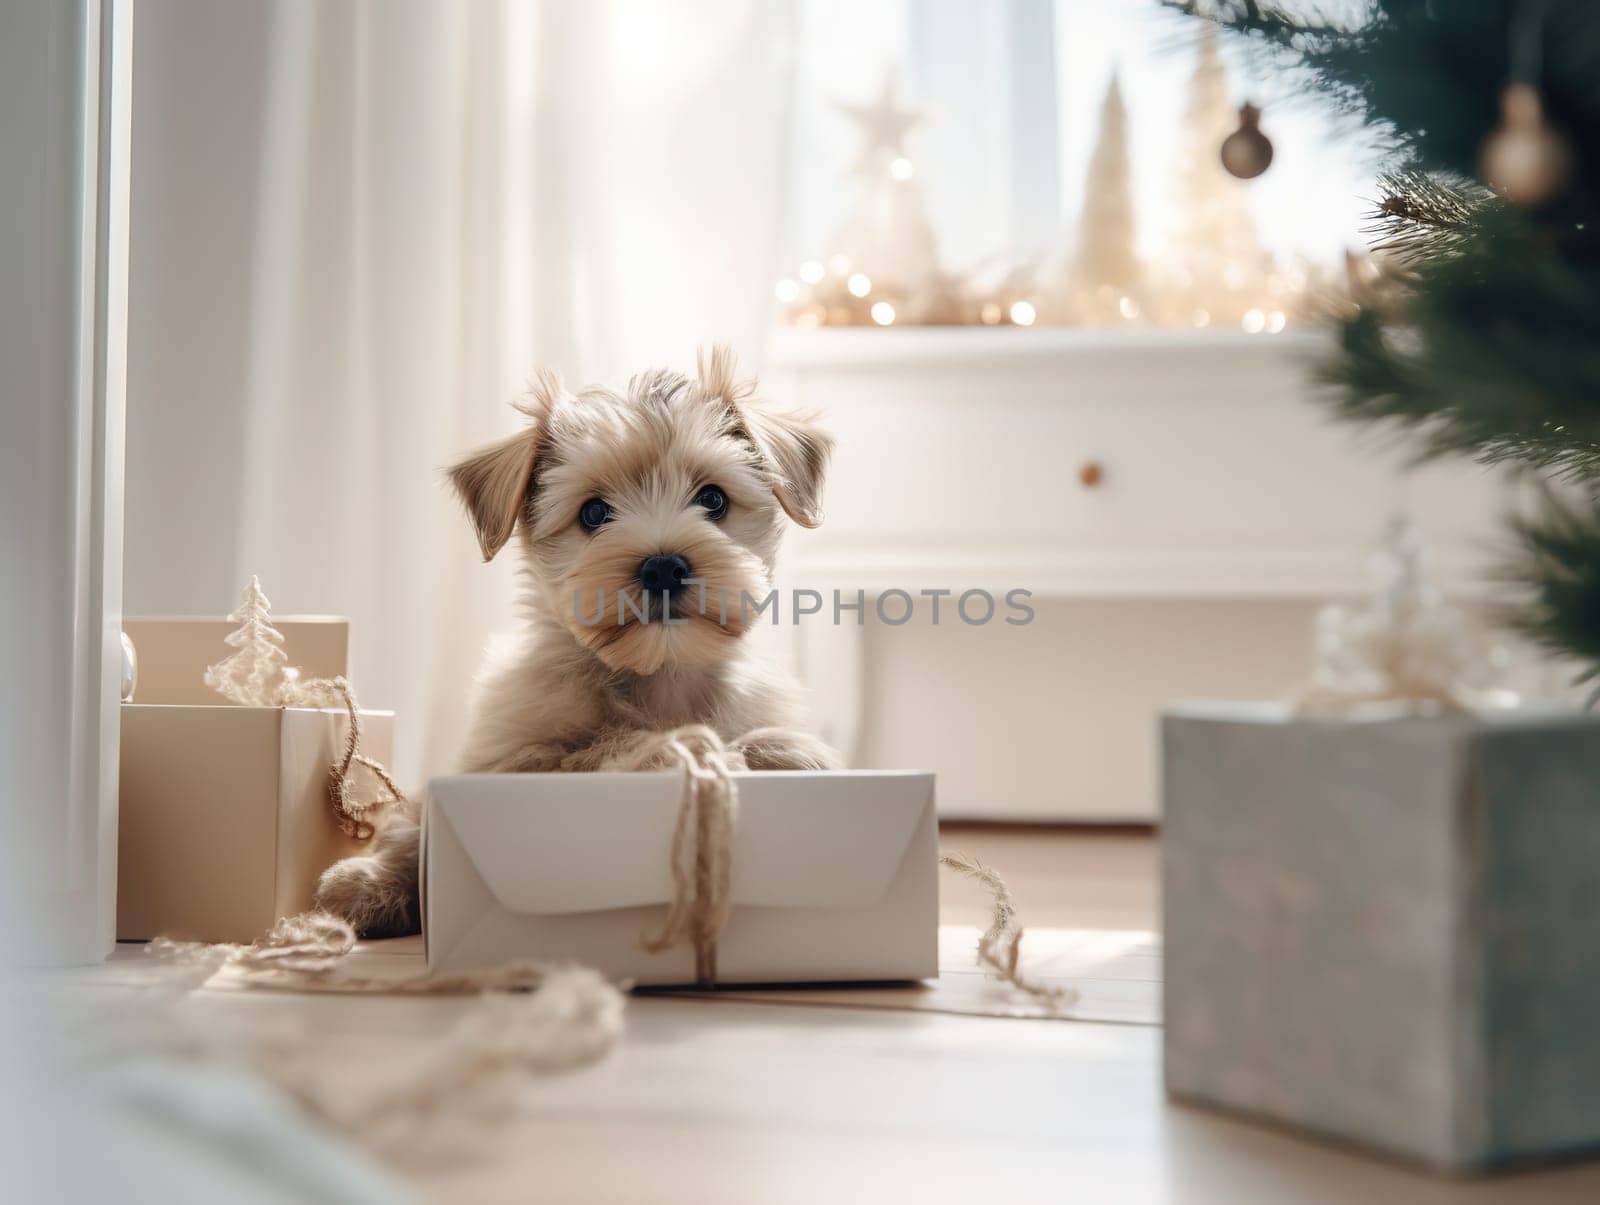 Puppy Sits Near Christmas Tree With Gifts In Room by GekaSkr